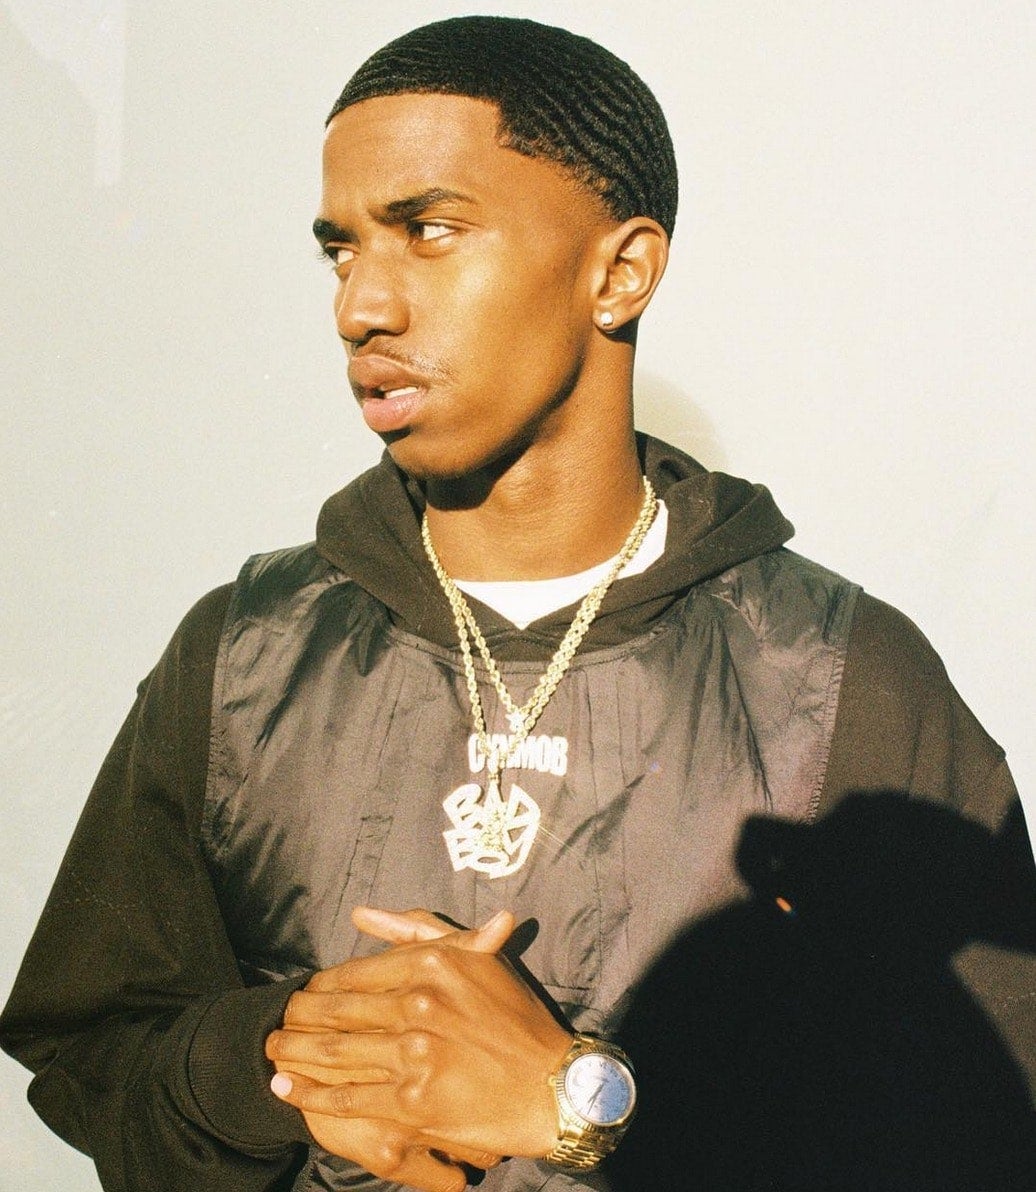 WATCH: Christian Combs Is Carrying On The Bad Boy Legacy With New EP 'Cyncerely, C3'